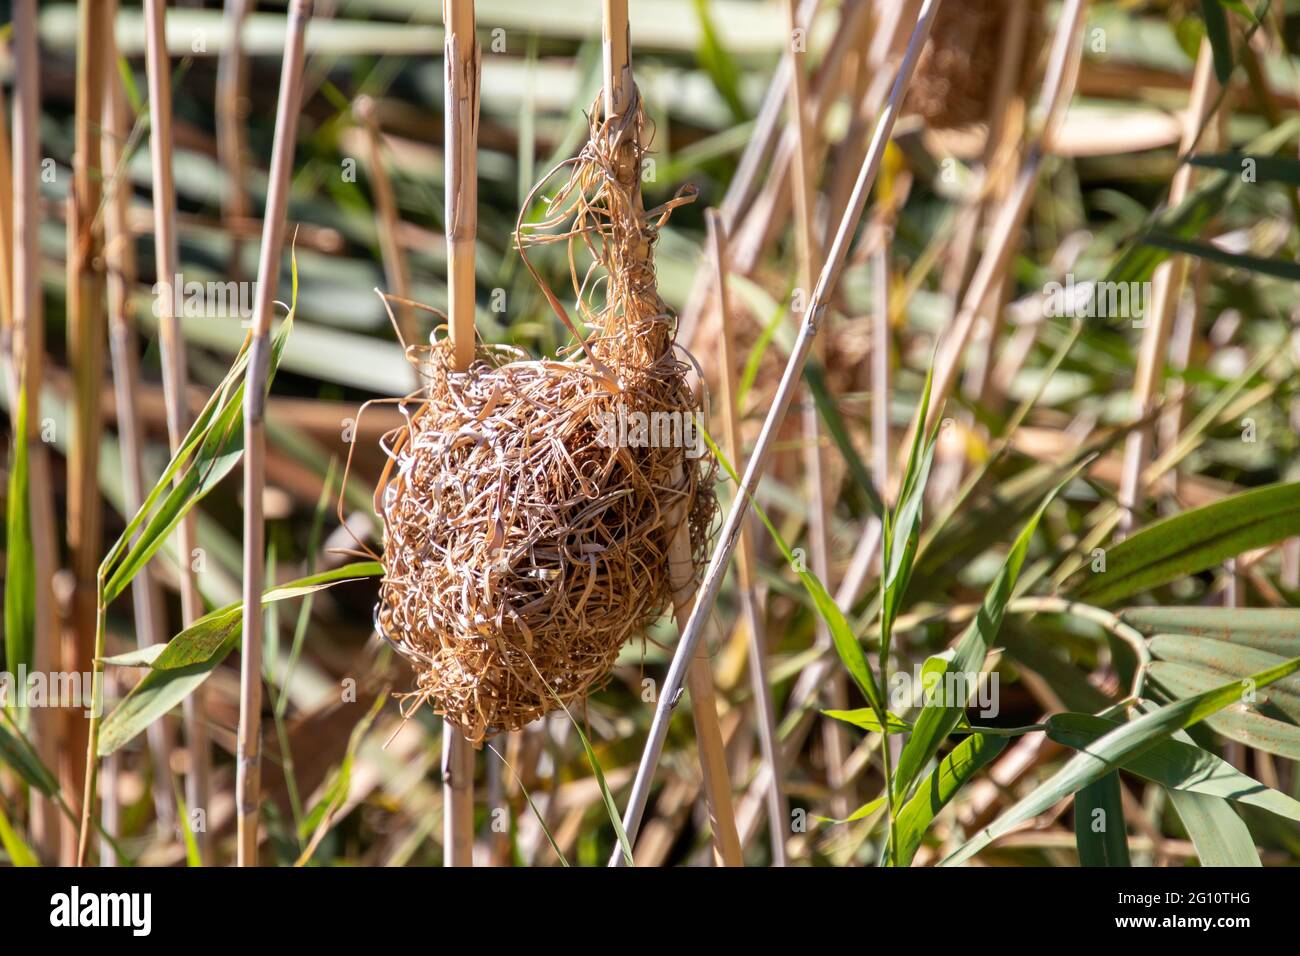 A bird's nest weaved from grass hangs in the reeds Stock Photo